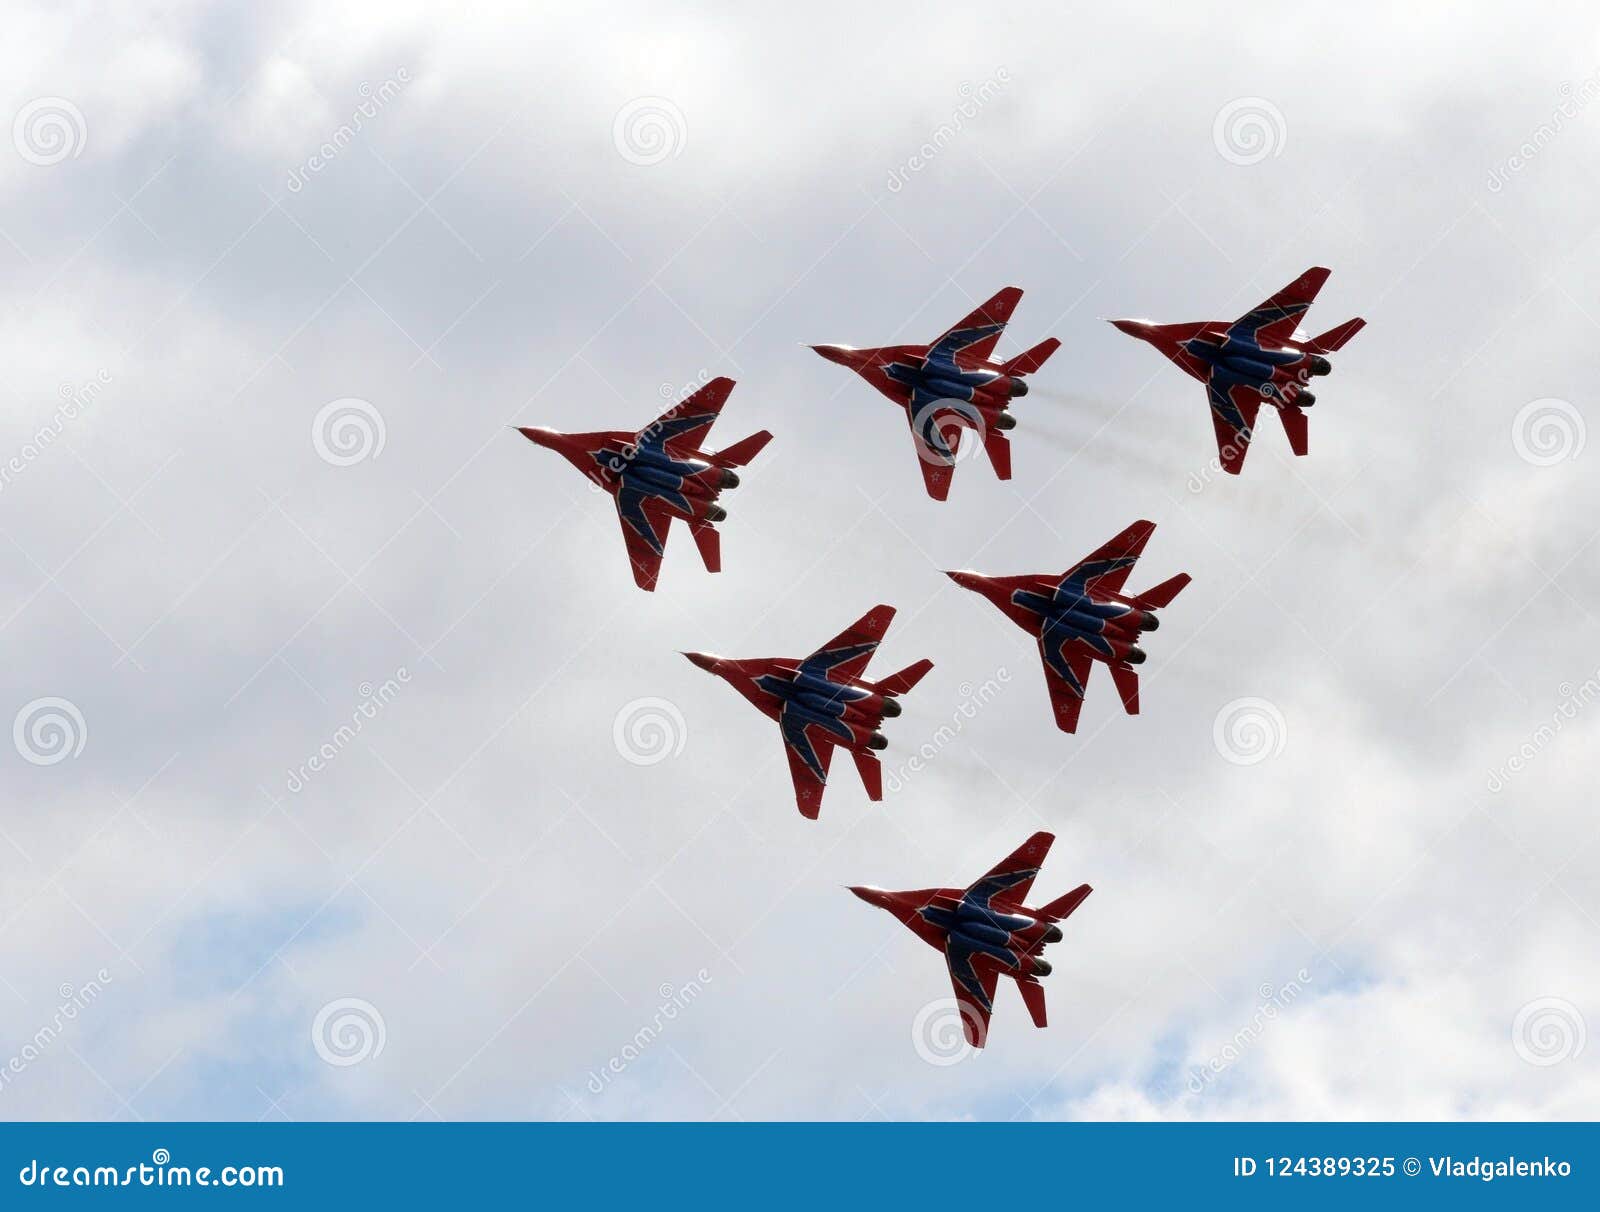 performance of the swifts aerobatic team on multi-purpose highly maneuverable mig-29 fighters over the myachkovo airfield